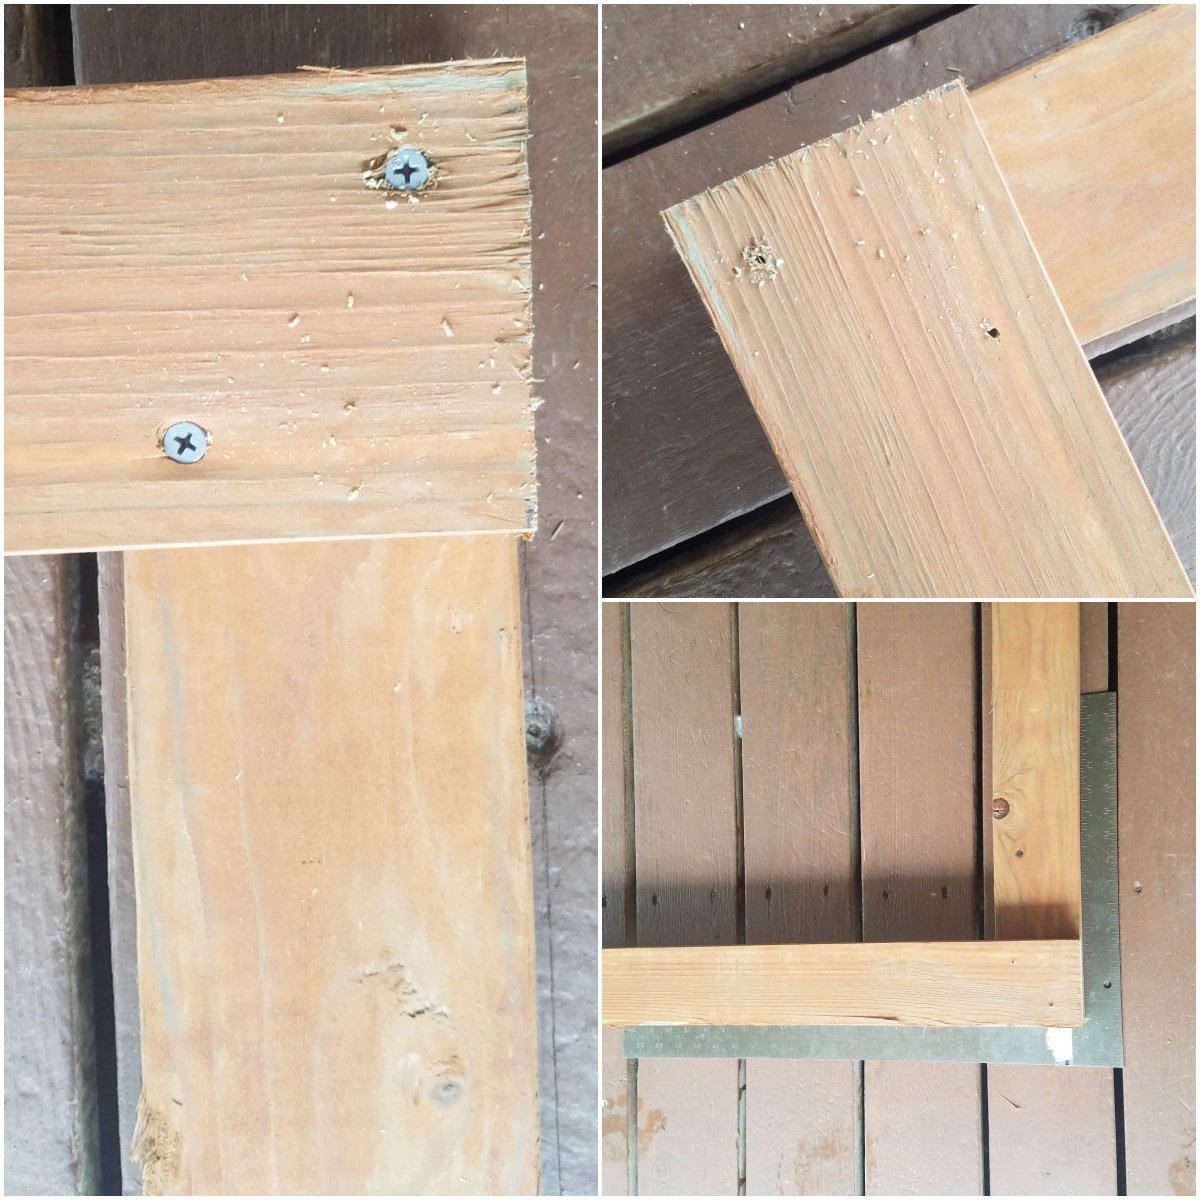 Frame back construction - secure corners with screws. 